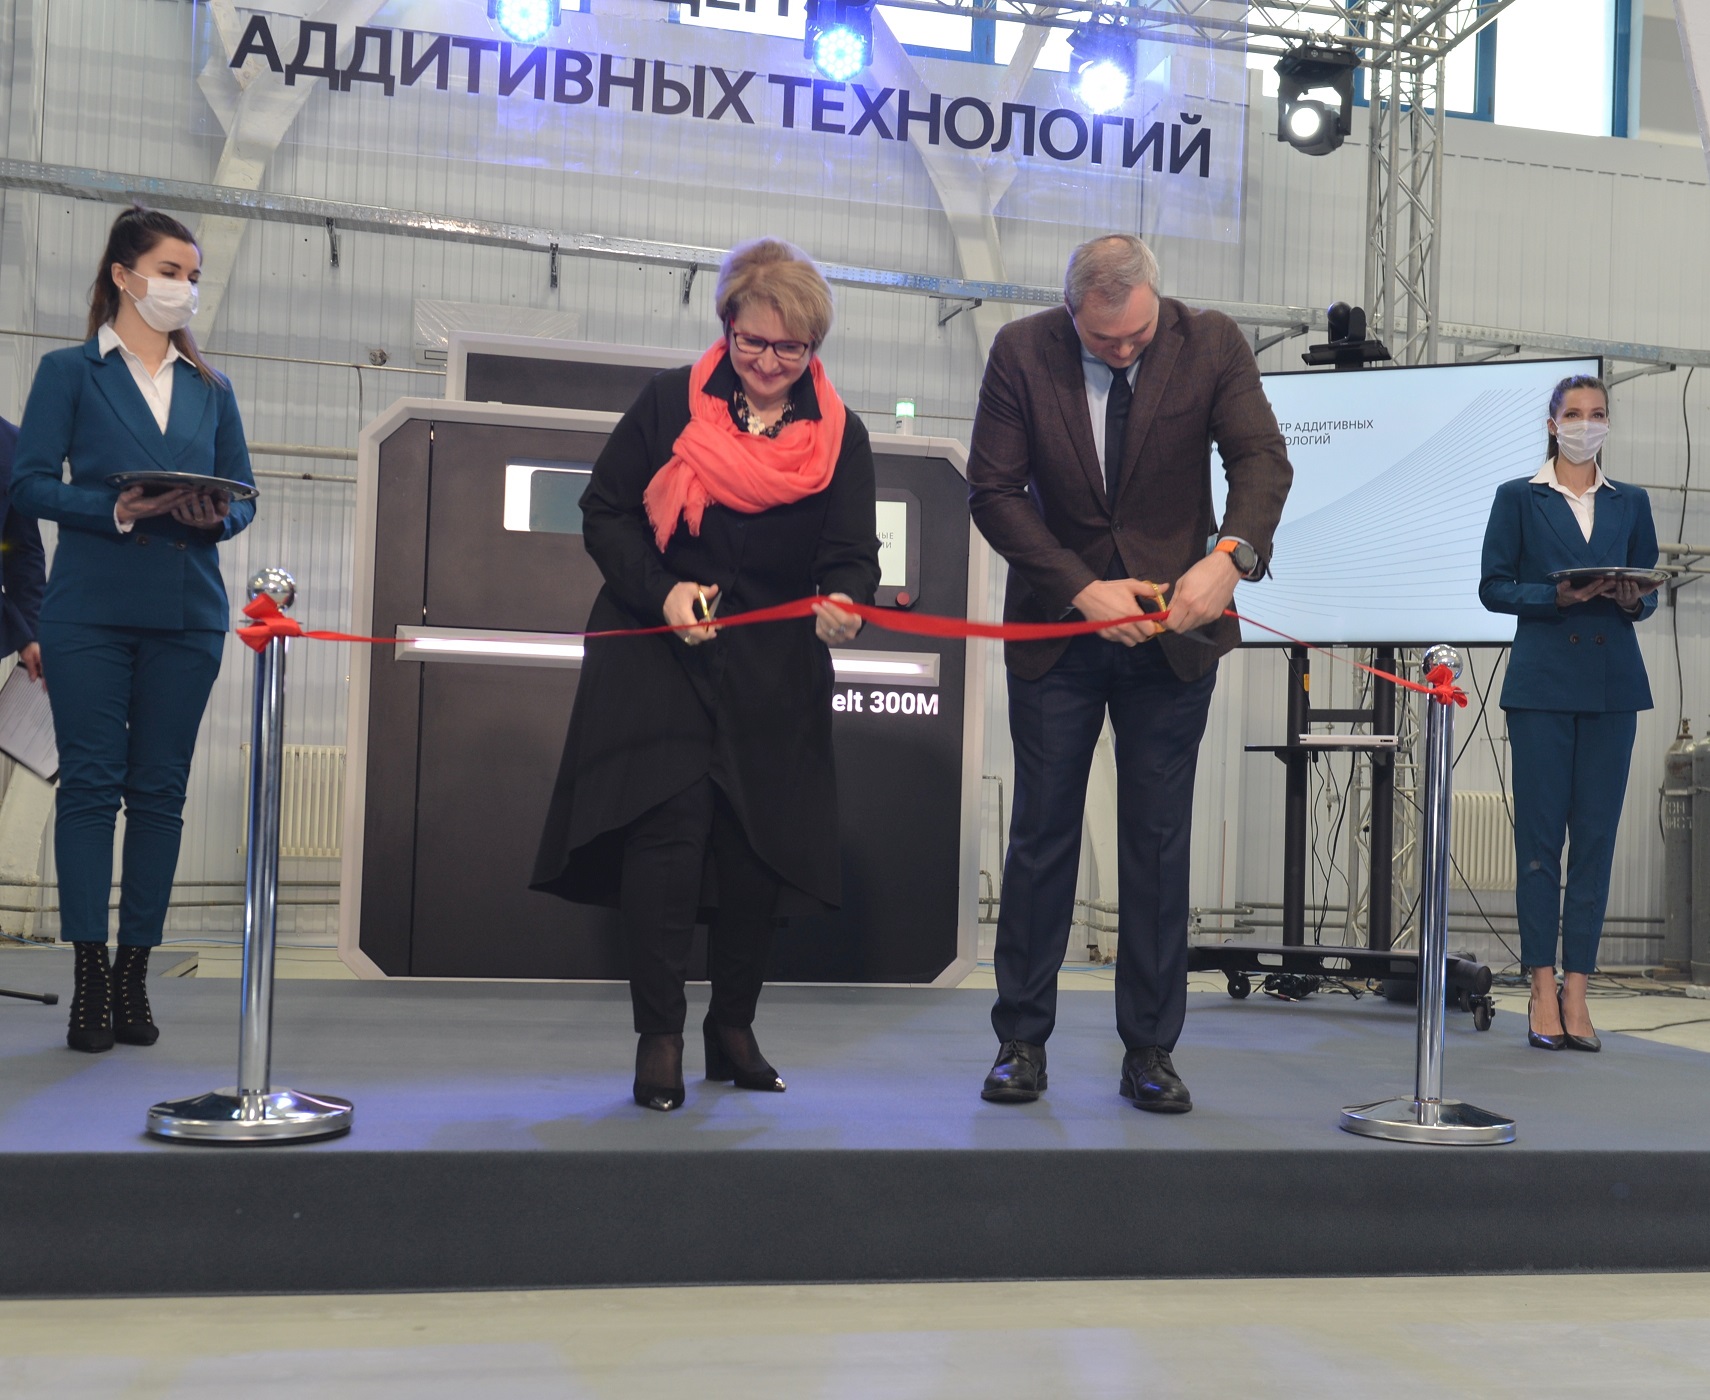 Rosatom launches its first Additive Technologies Center in Moscow